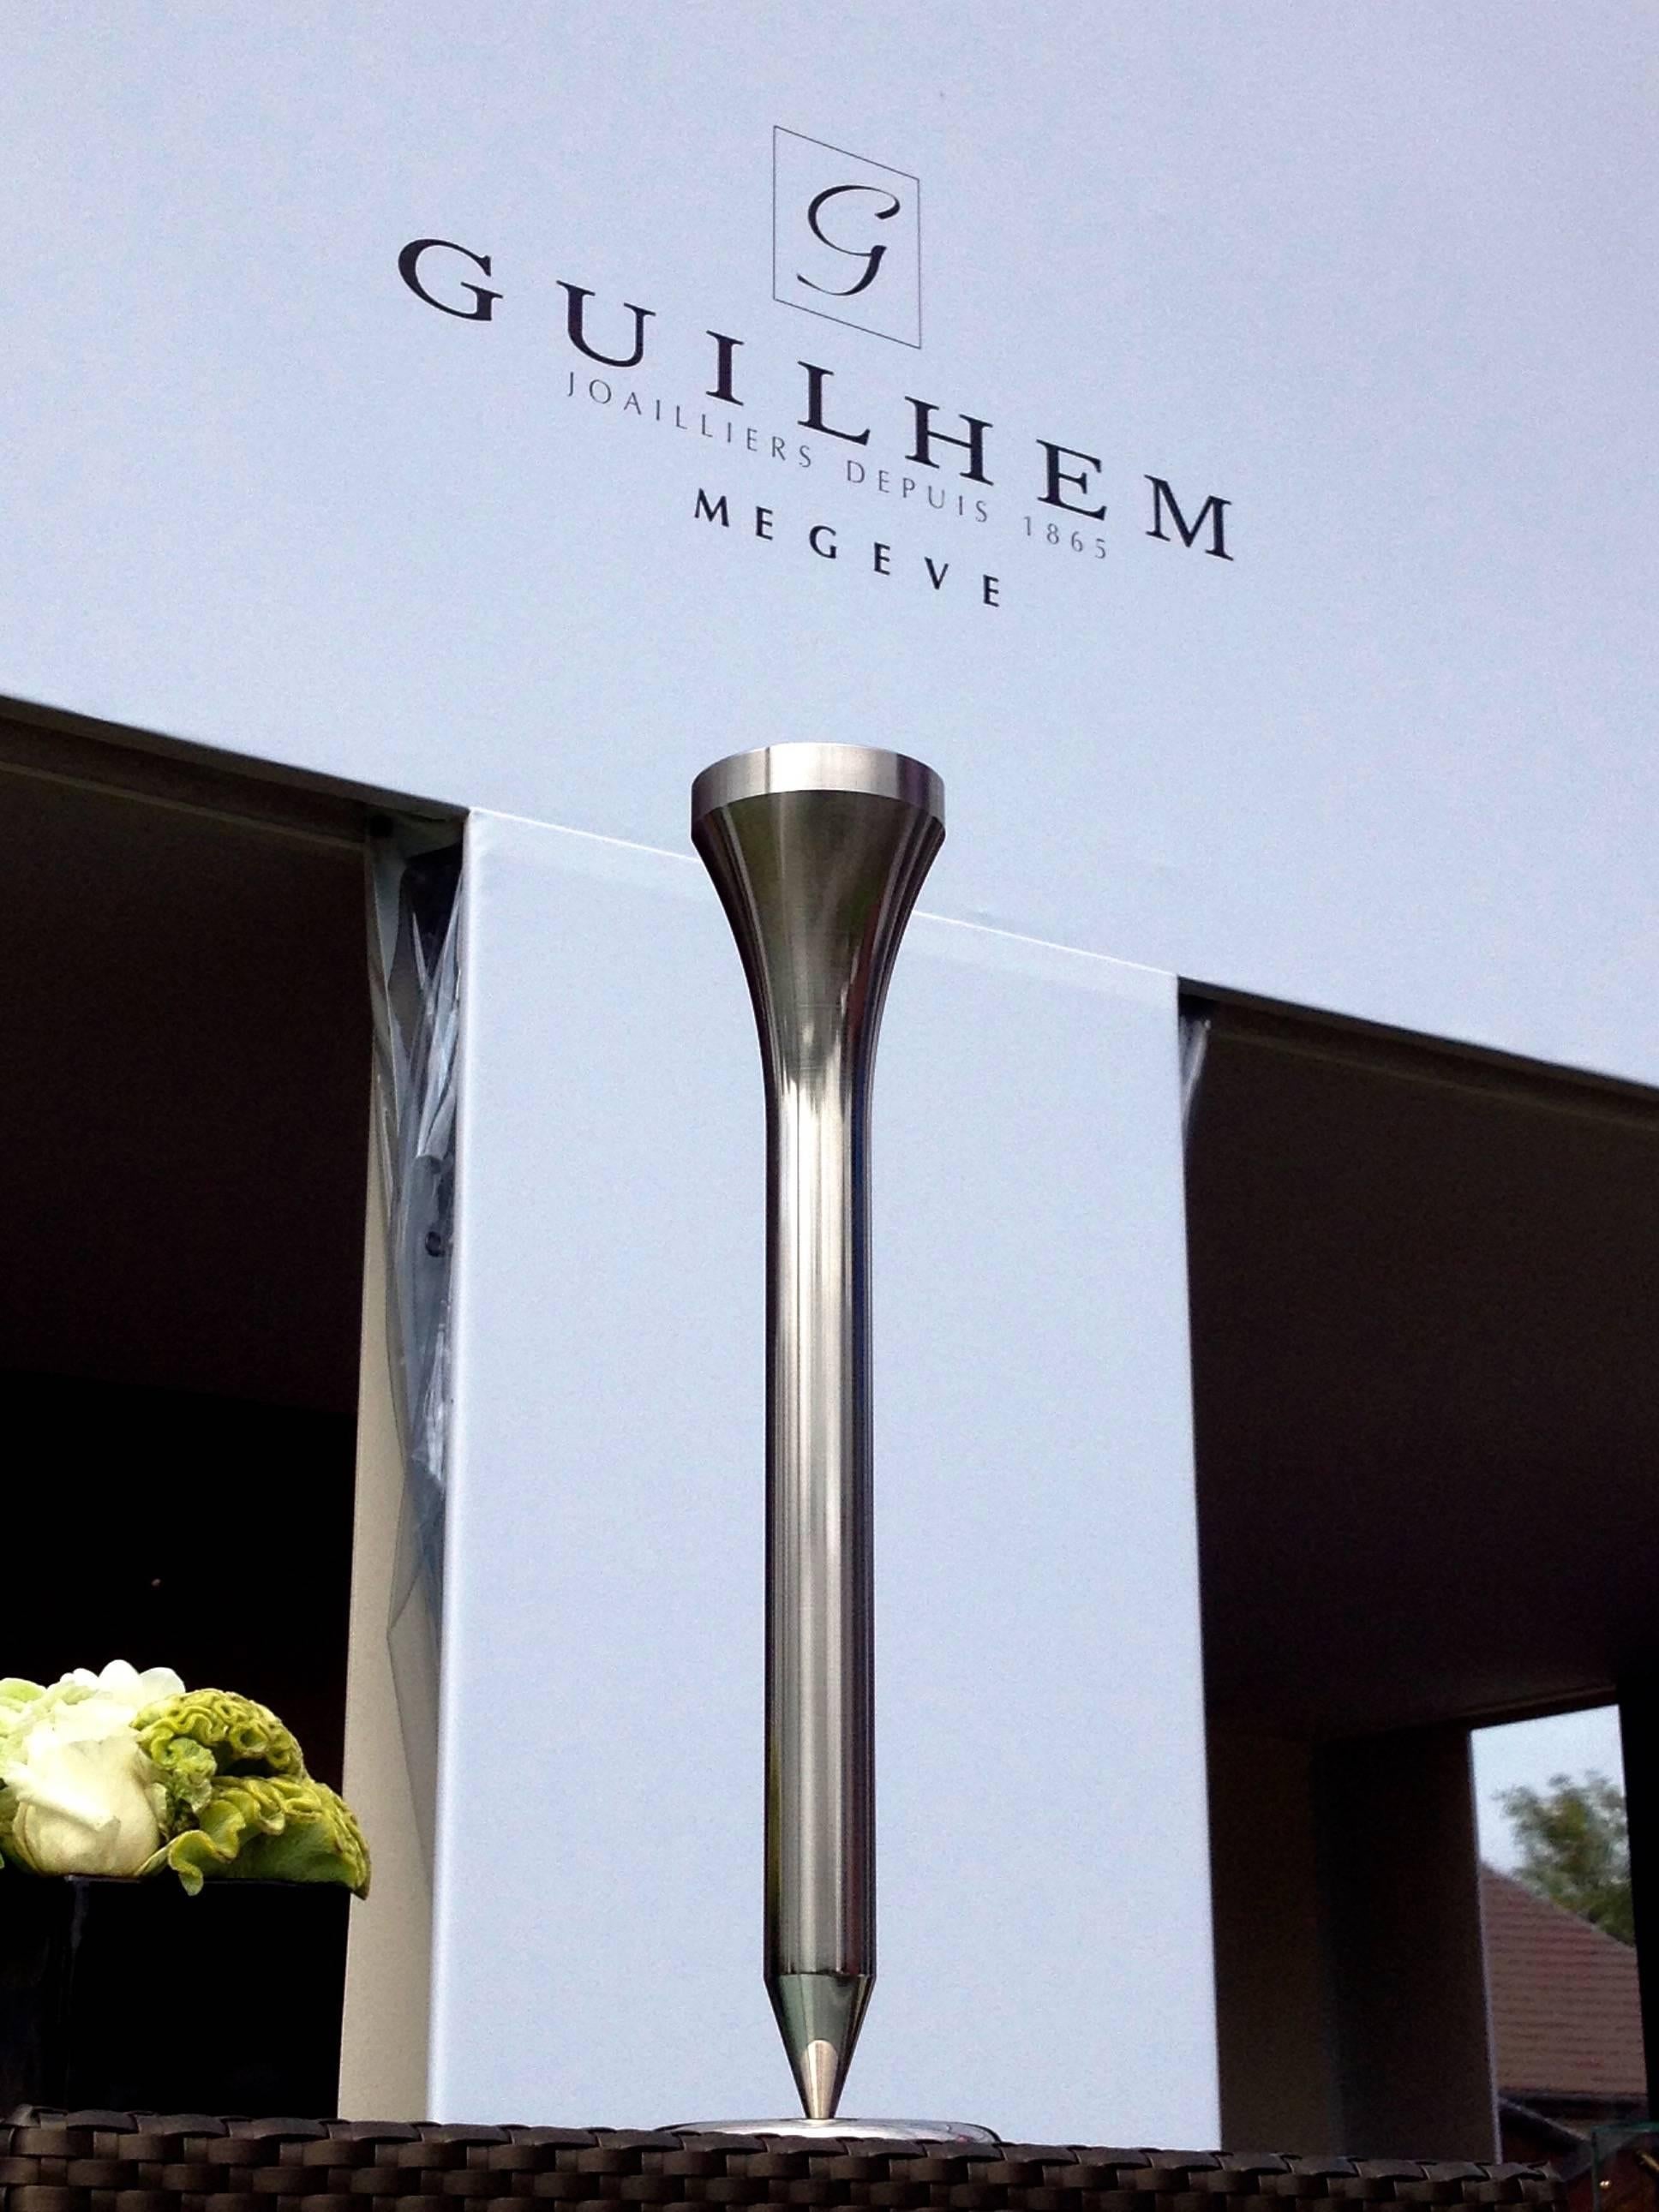 Stainless Steel Golf Tee Sculpture, Numbered Edition by Hubert Prive In Excellent Condition For Sale In London, GB